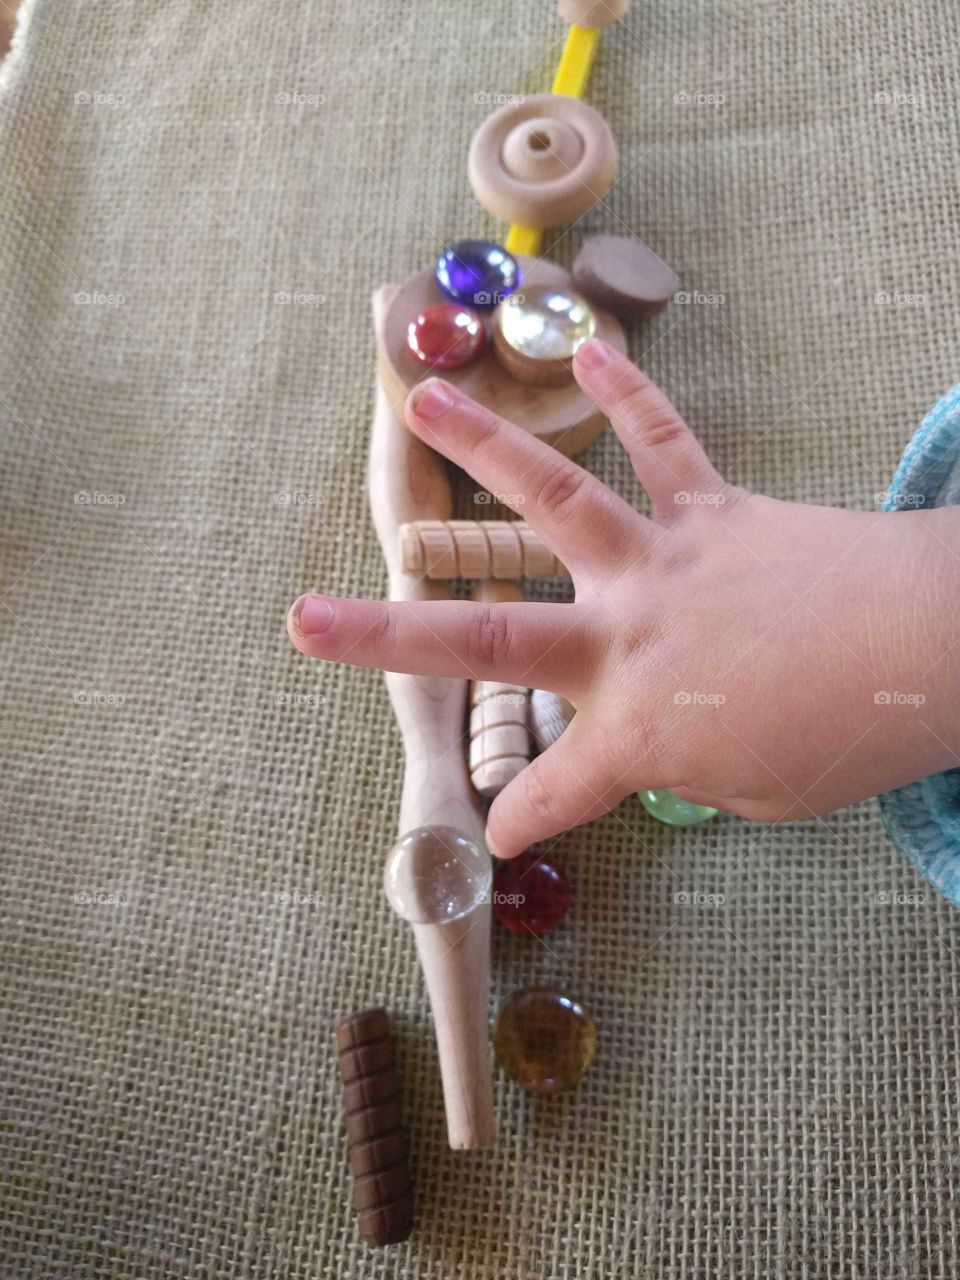 A small child practices counting